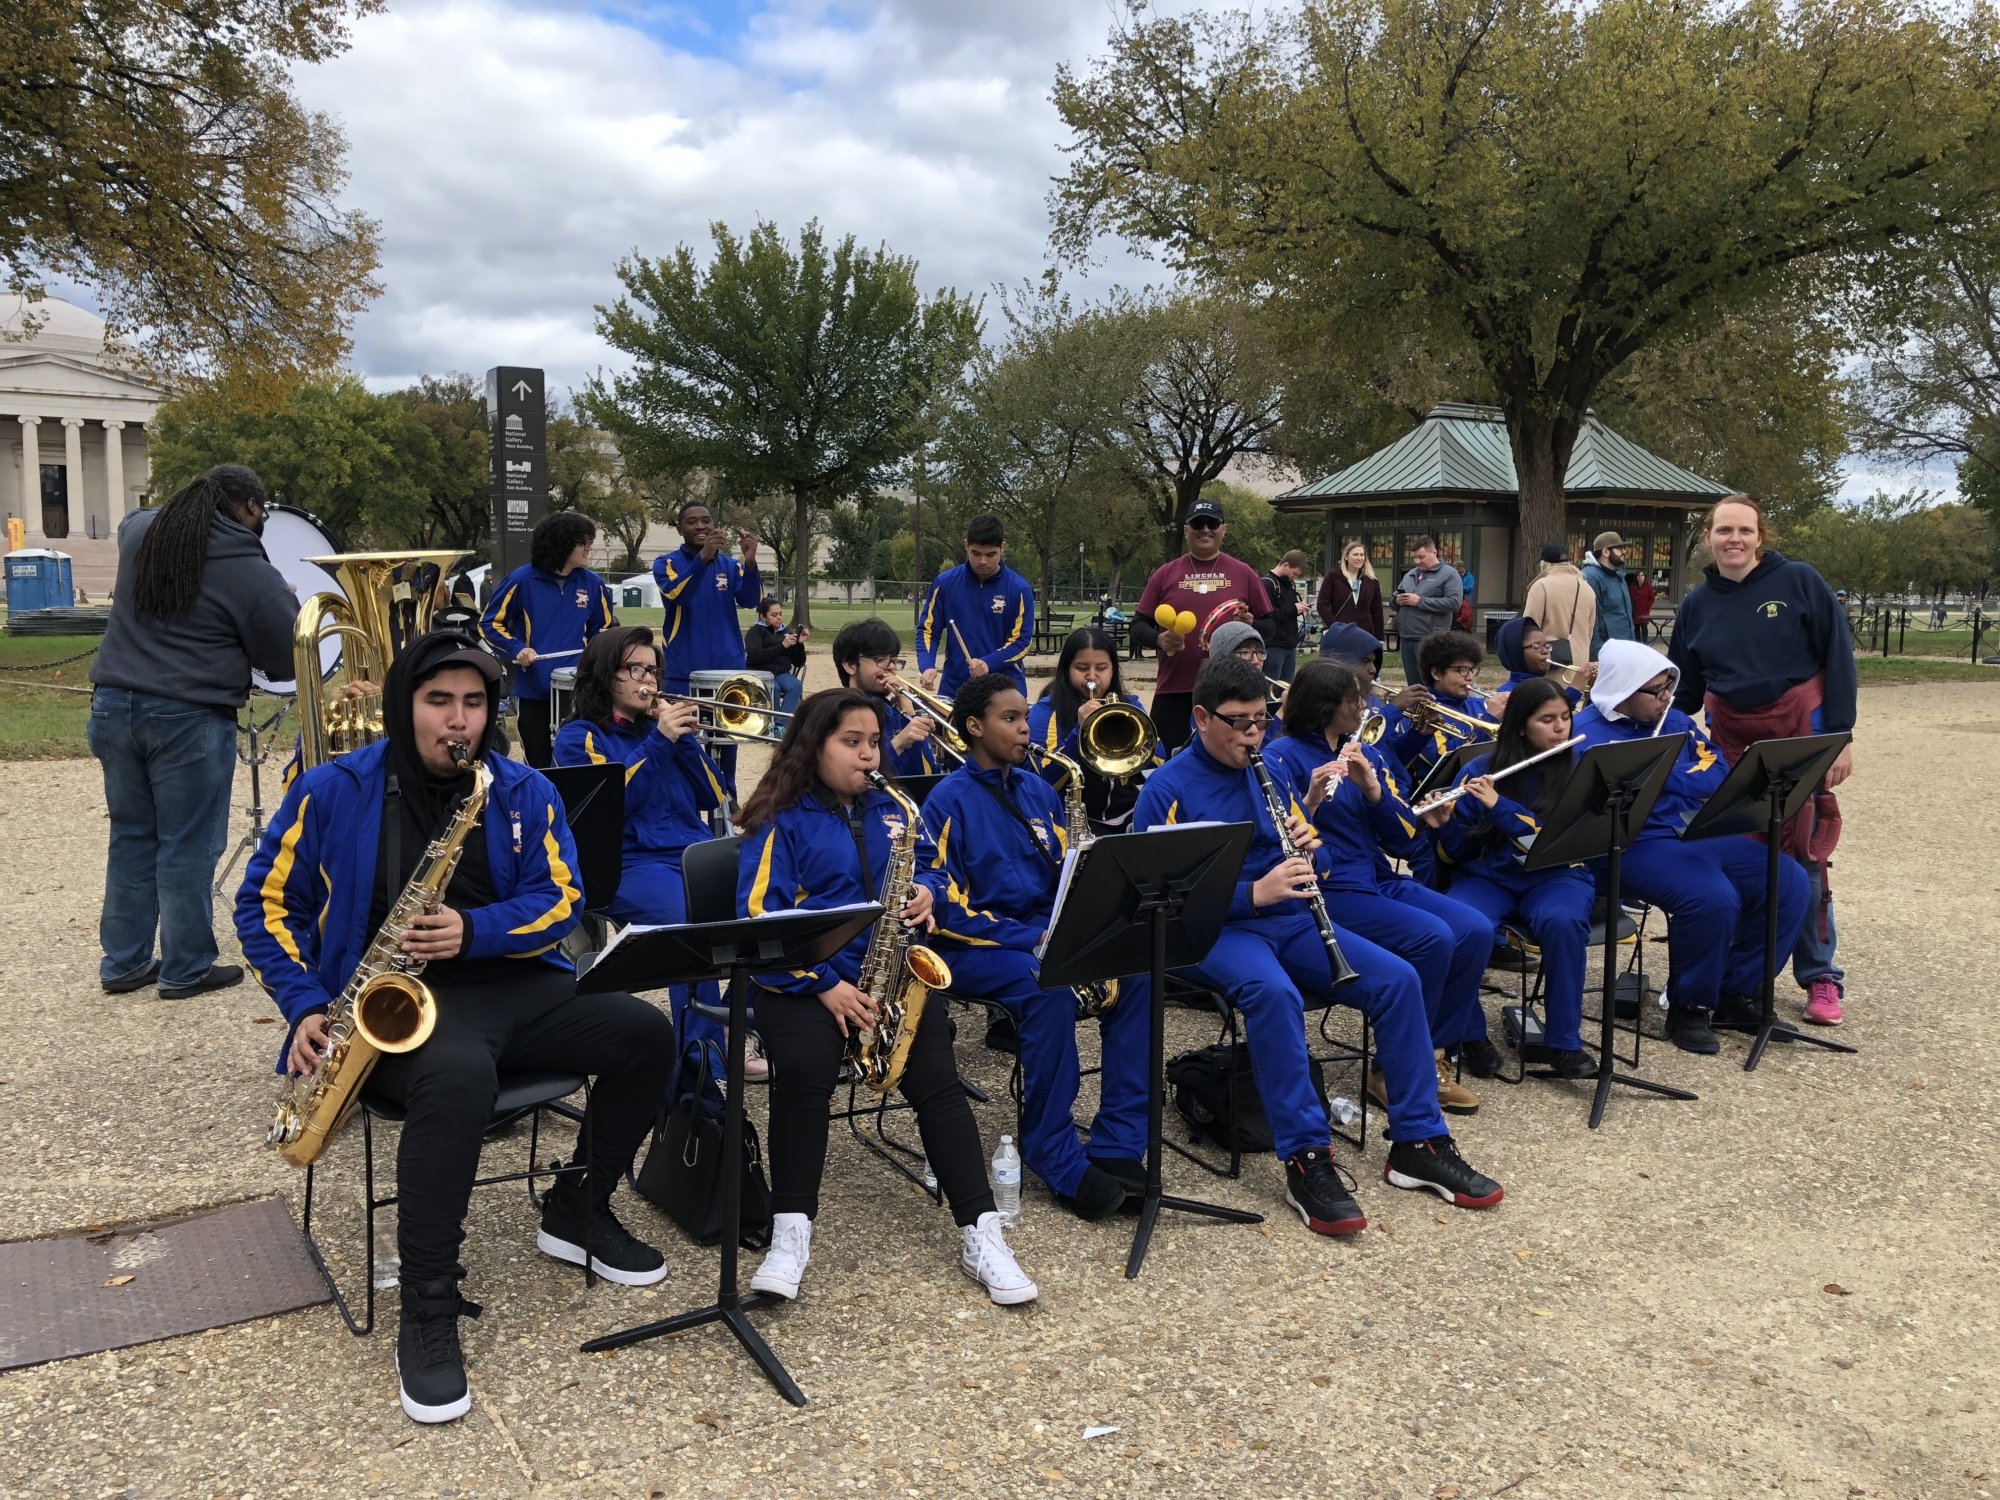 Local marching band gives back by playing to inspire marathon runners